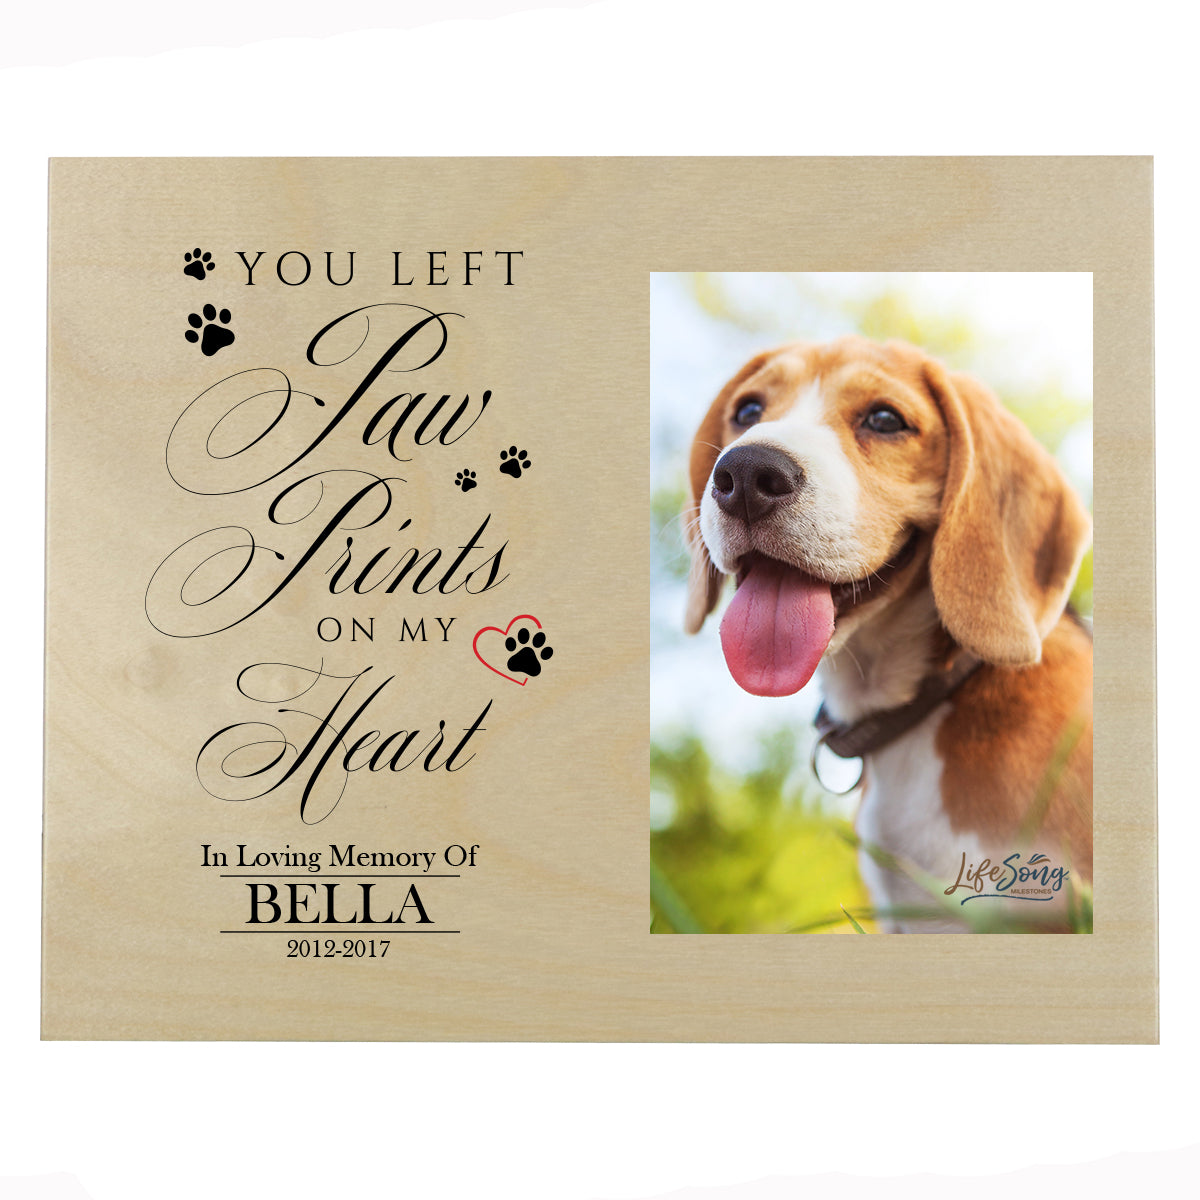 Pet Memorial Photo Wall Plaque Décor - You Left Paw Prints On My Heart